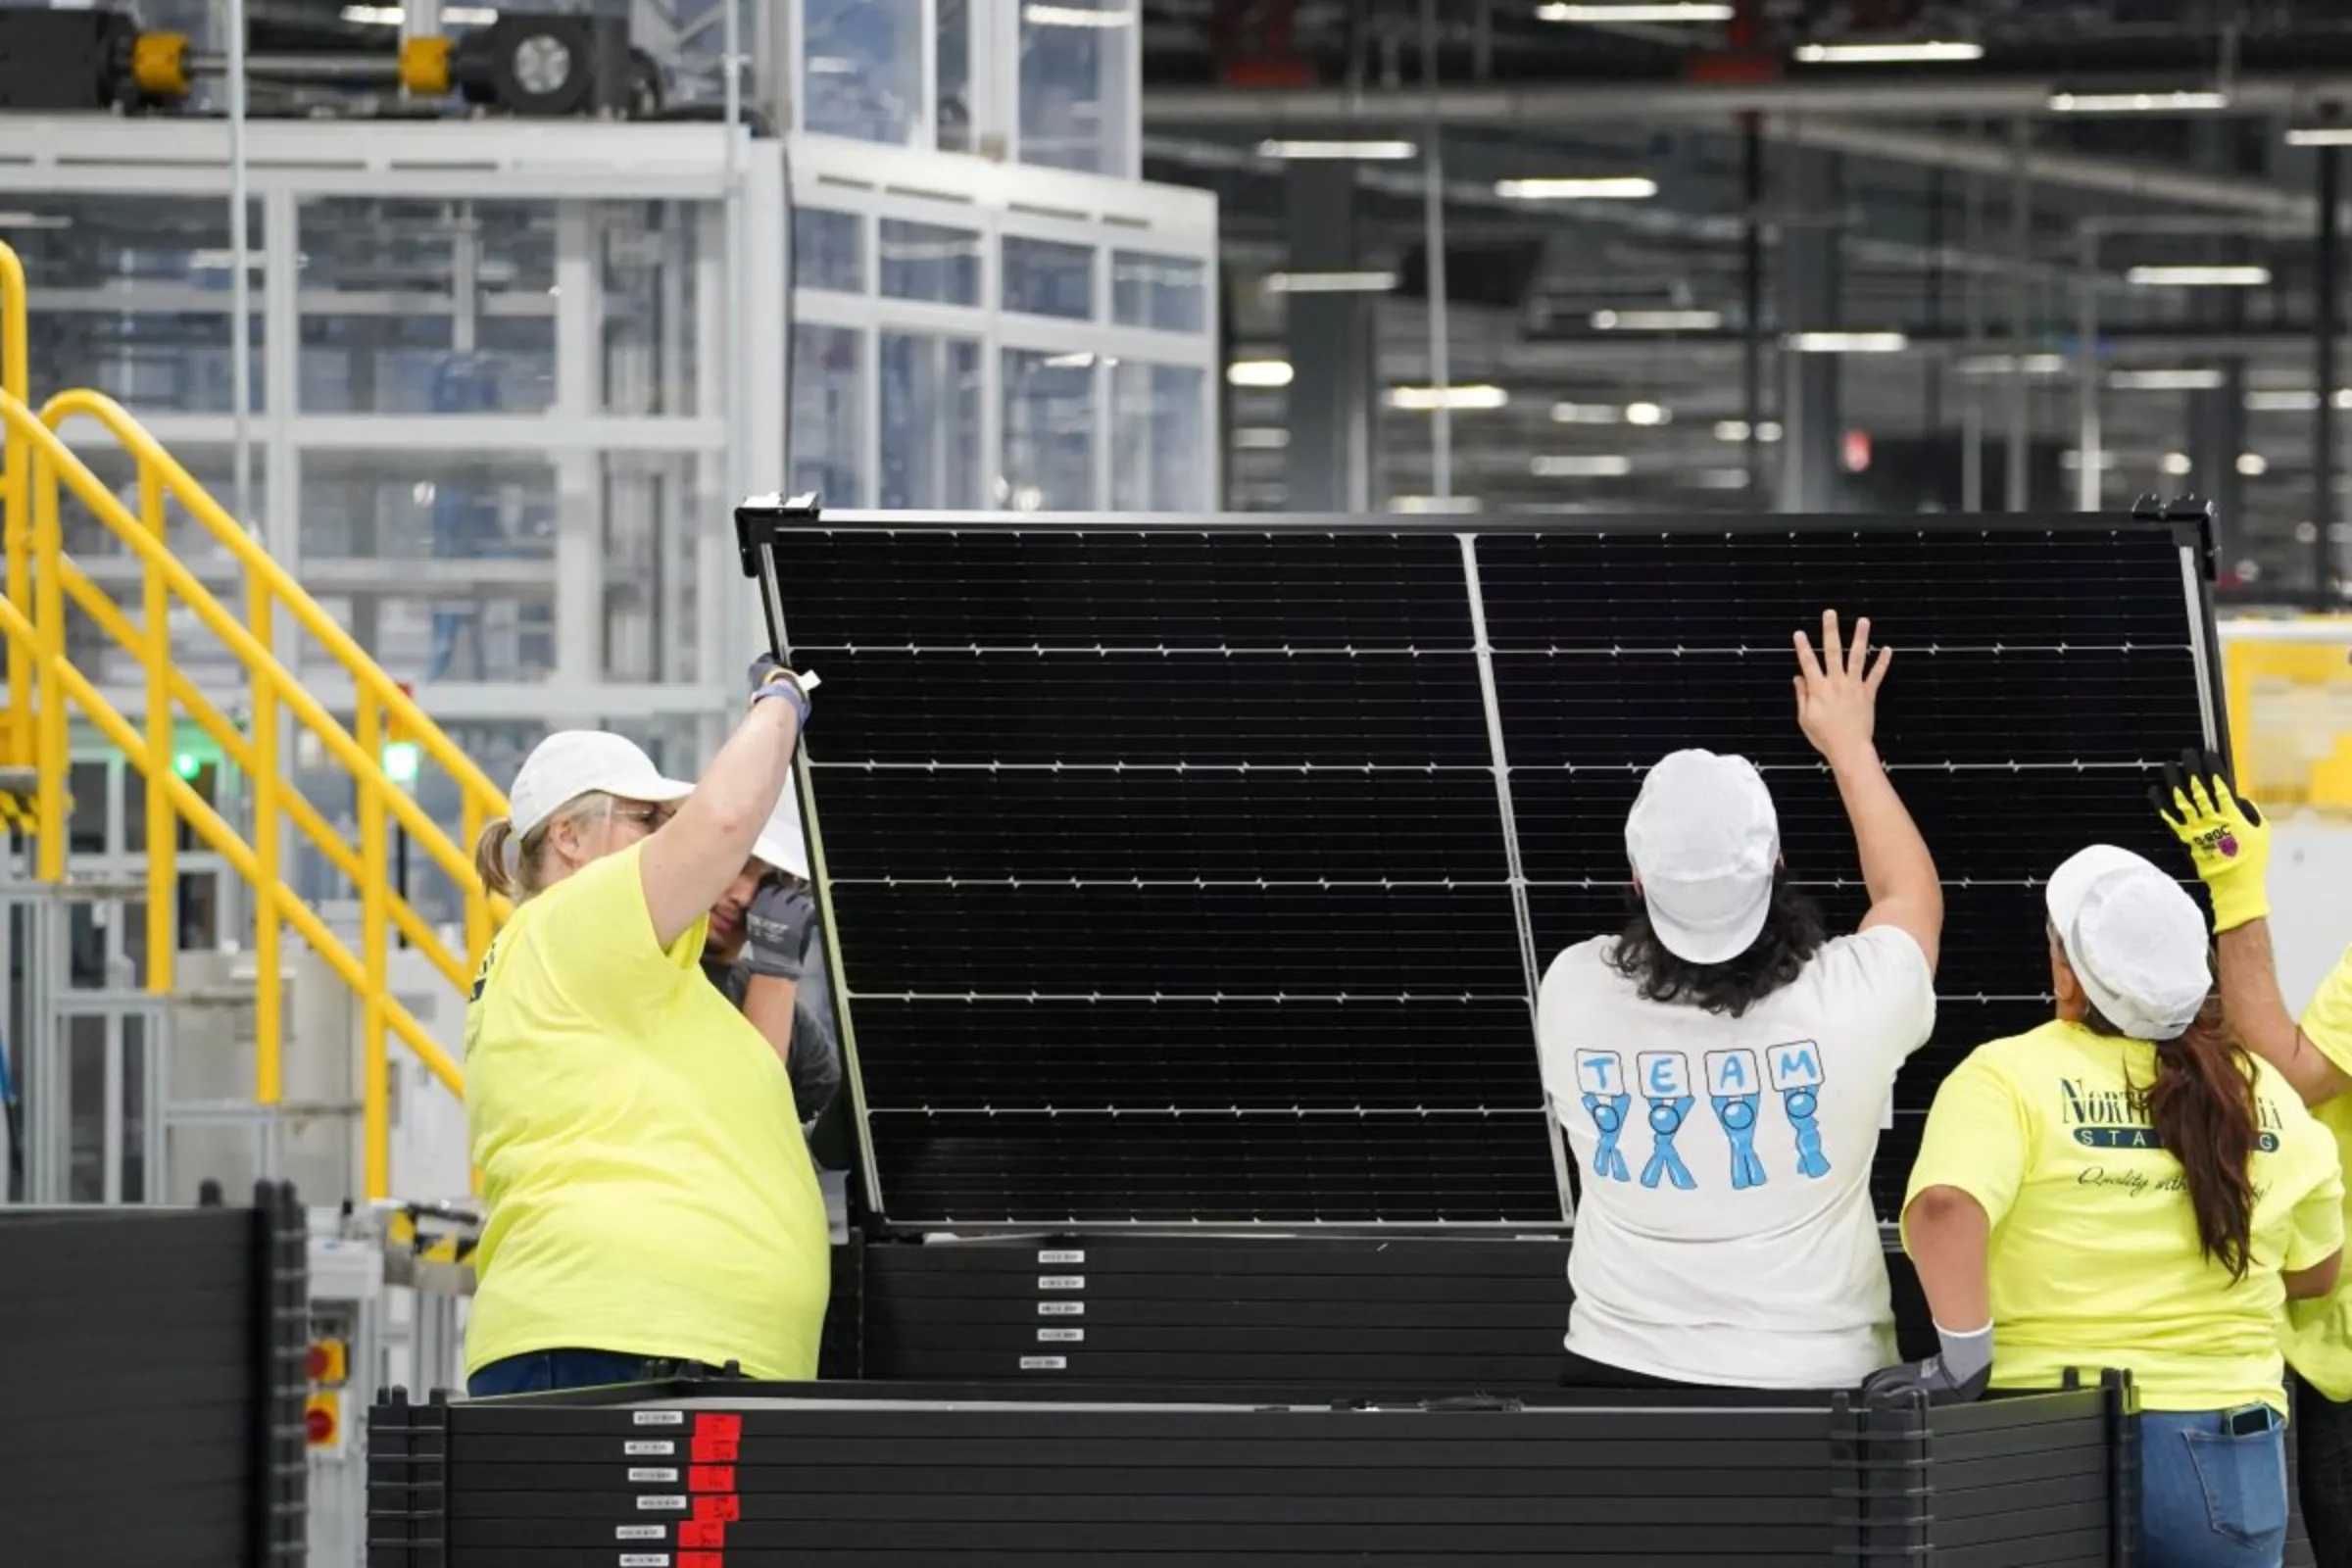 Employees work on solar panels at the QCells solar energy manufacturing factory in Dalton, Georgia, U.S., March 2, 2023